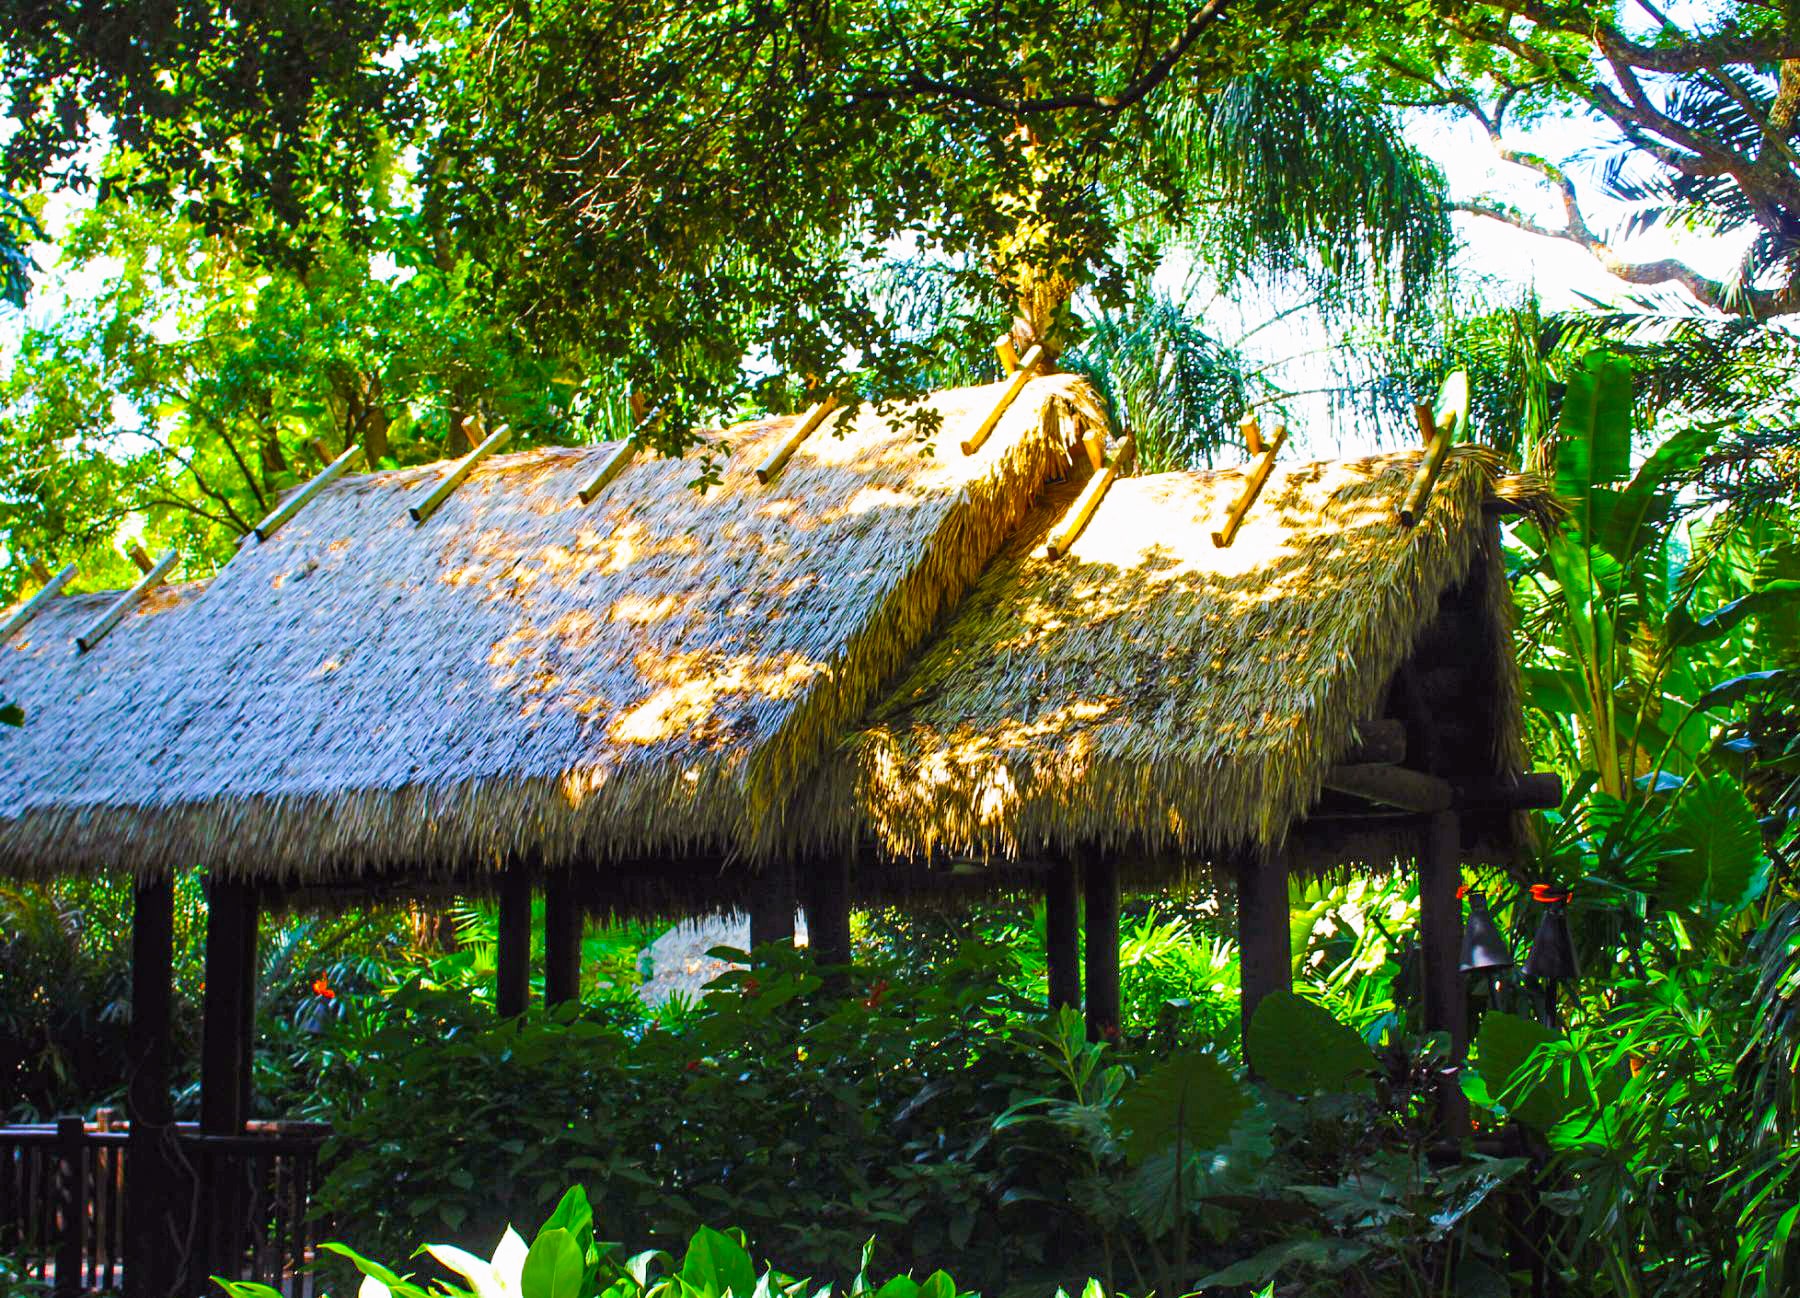 Natural thatched palapa in a forest setting.